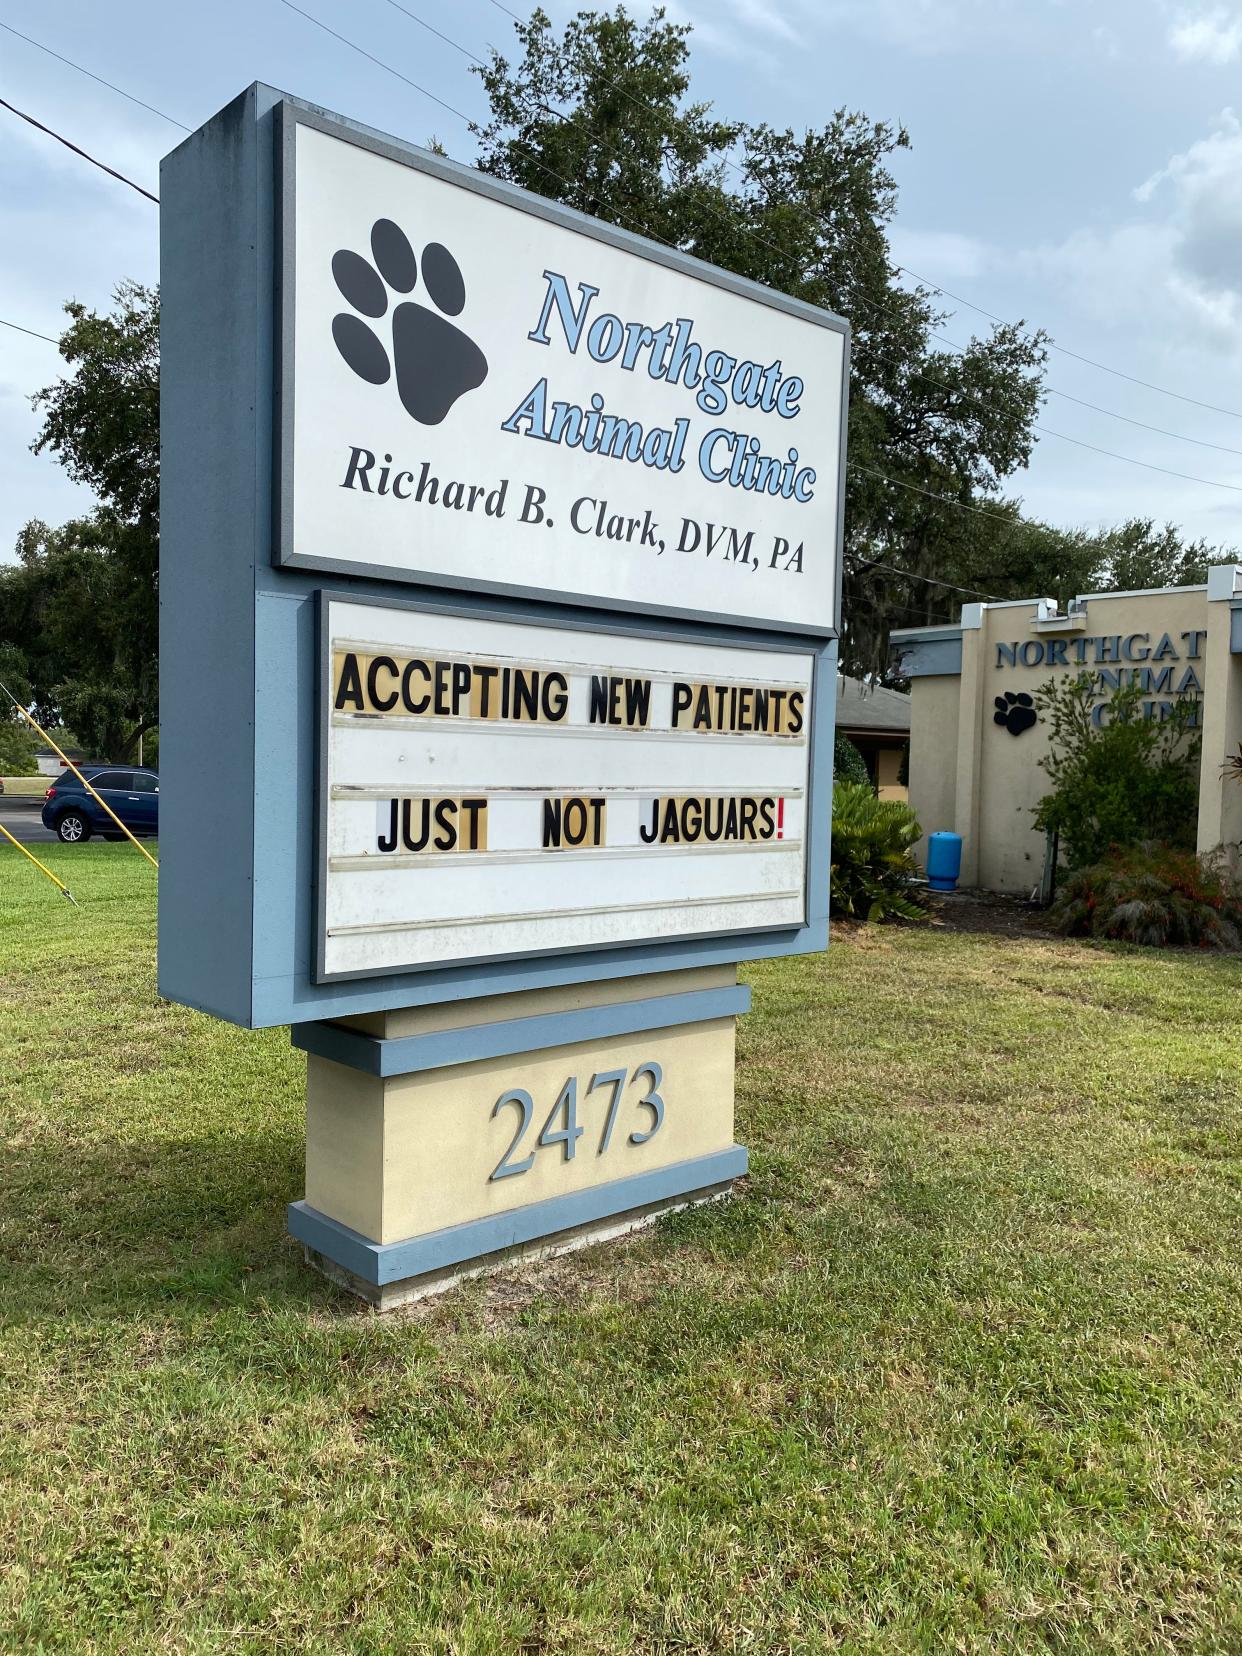 The good folks at Northgate Animal Clinic in Fruitland Park have kept their sense of humor.